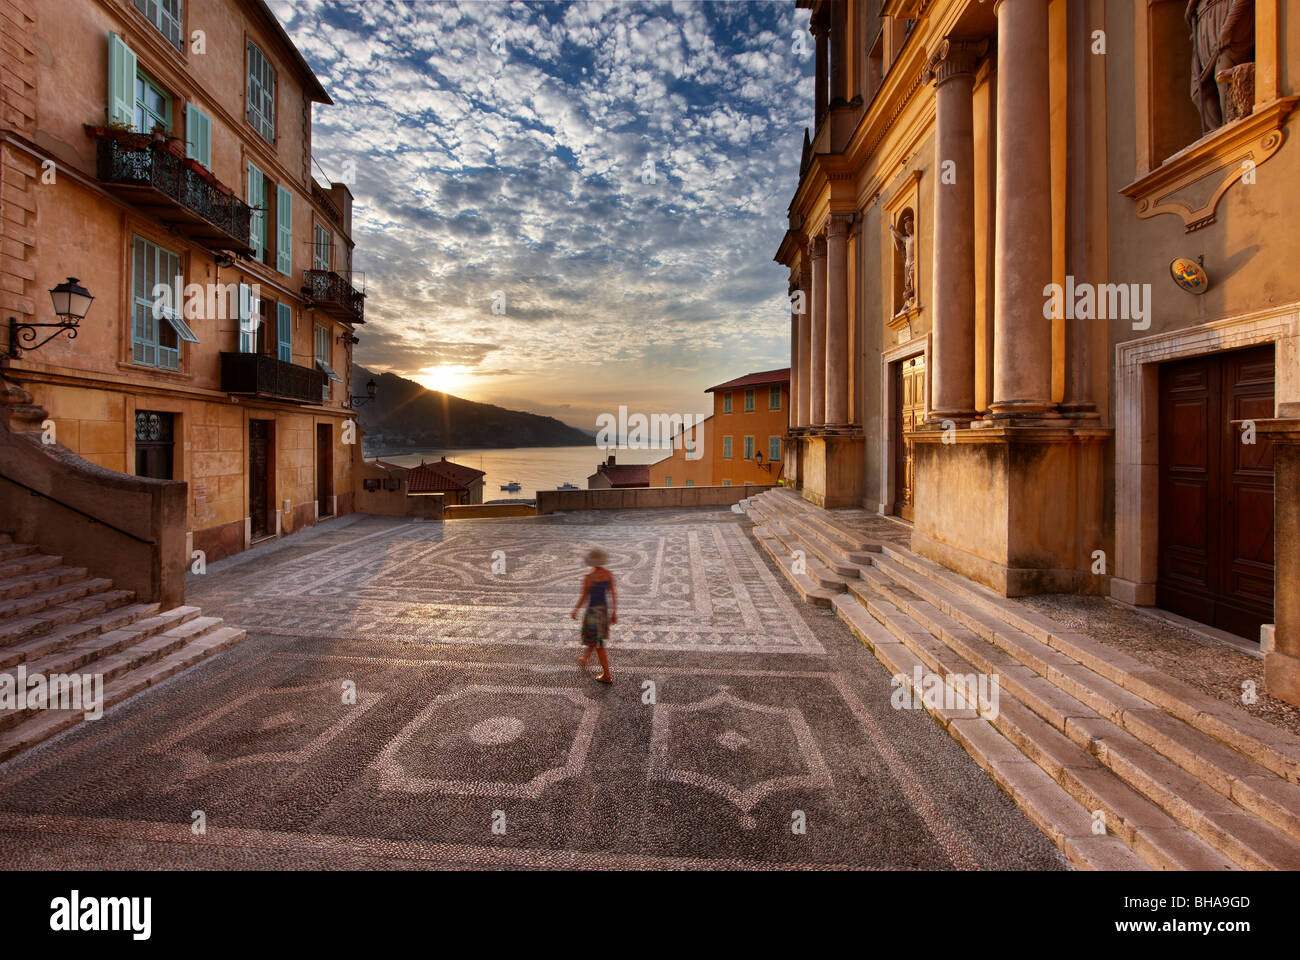 a woman walking through Parvis St Michel at dawn, the Old Town, Menton, Cote d'Azur, Alpes Maritime, Provence, France Stock Photo